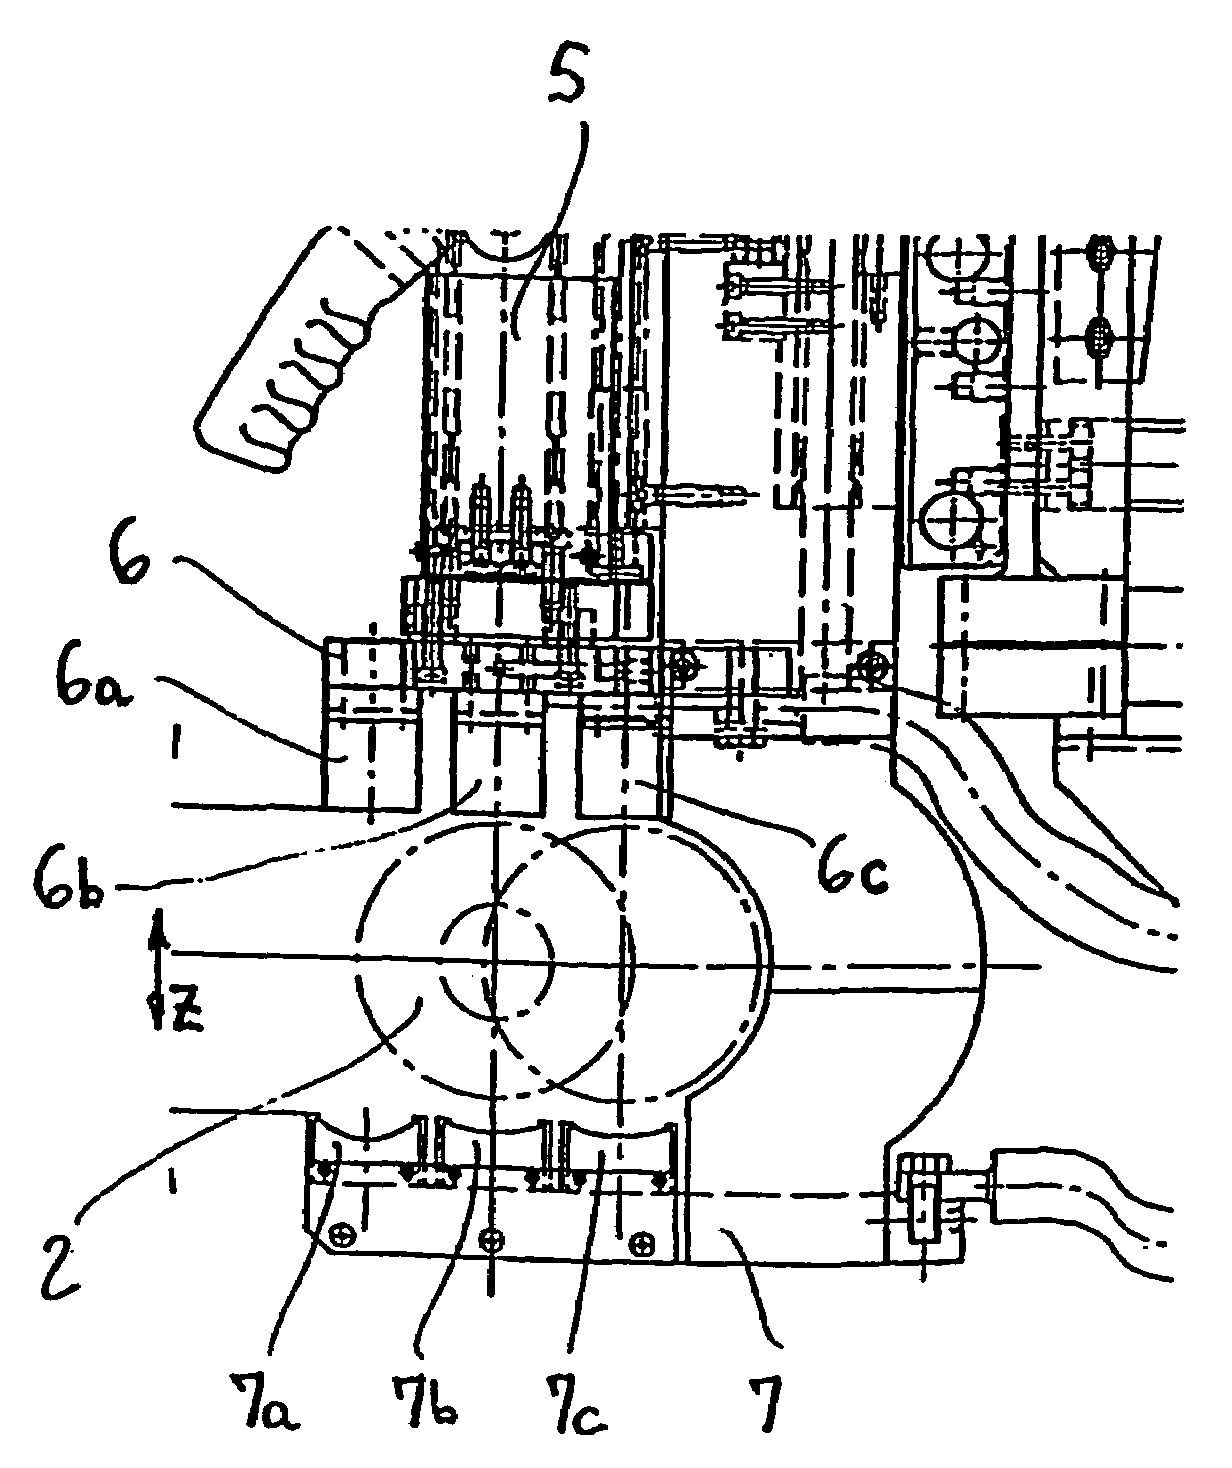 Device and method for fastening balancing weights to rotors, in particular to propeller shafts or cardan shafts